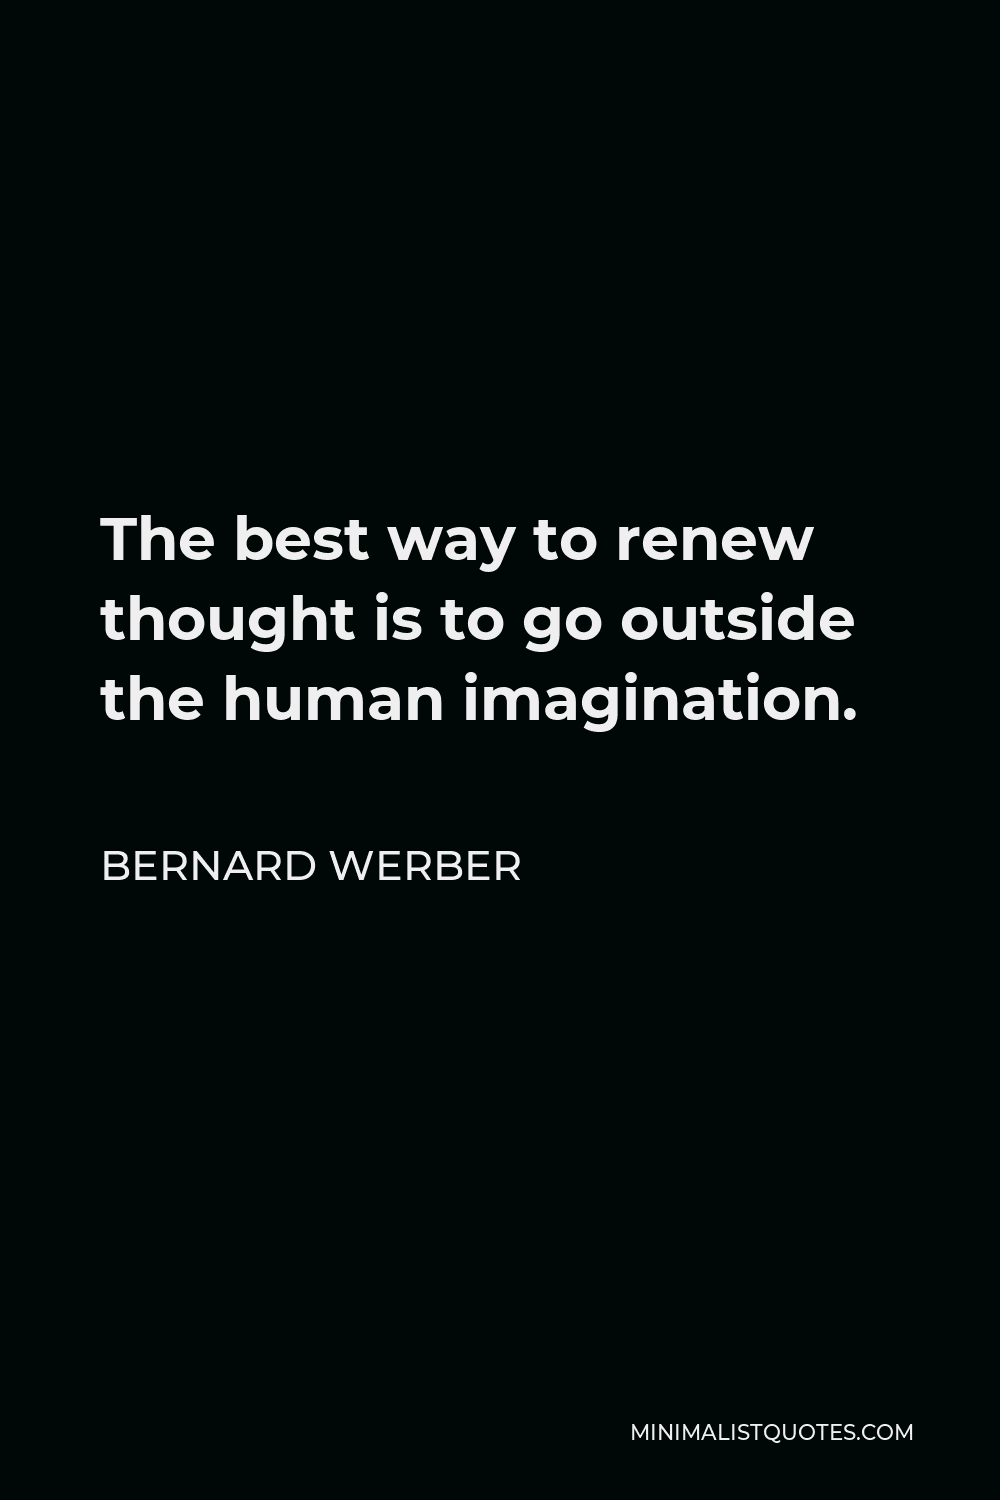 Bernard Werber Quote - The best way to renew thought is to go outside the human imagination.